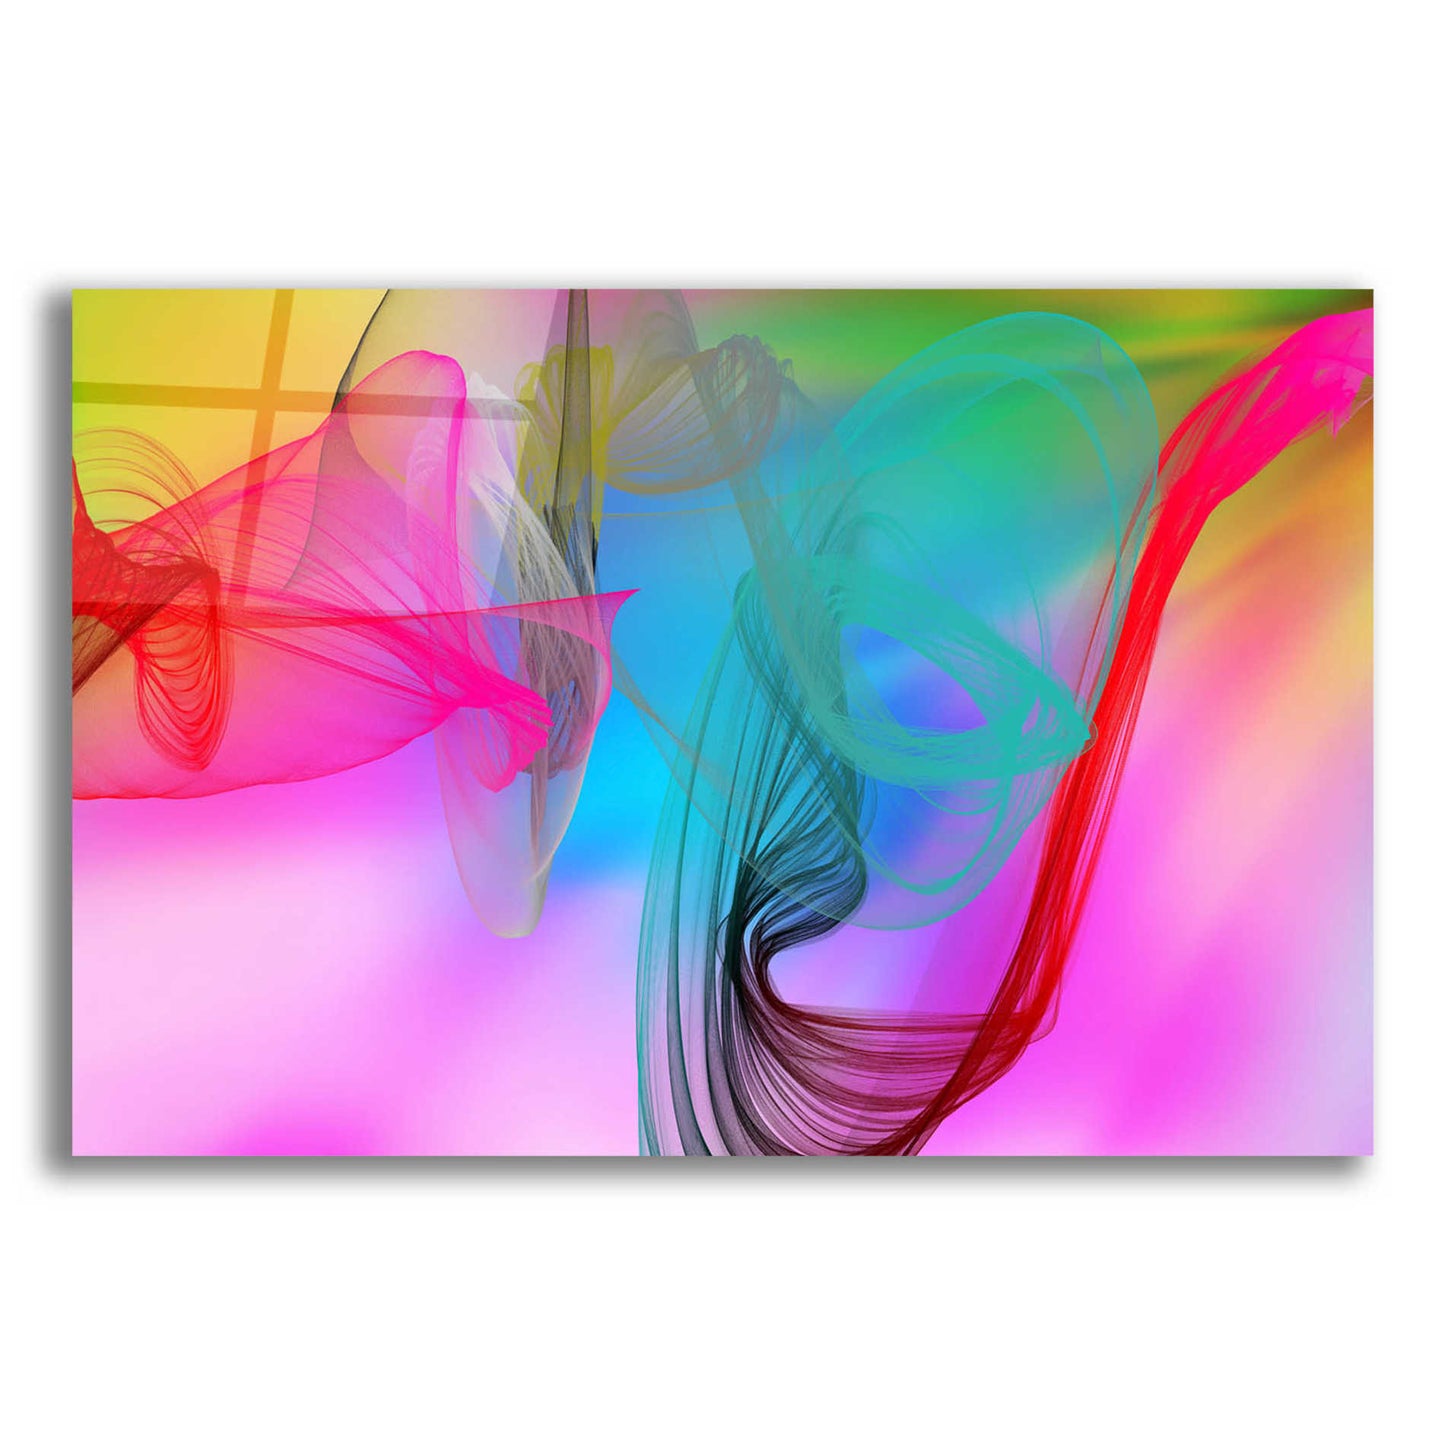 Epic Art 'Color In The Lines 8' by Irena Orlov Acrylic Glass Wall Art